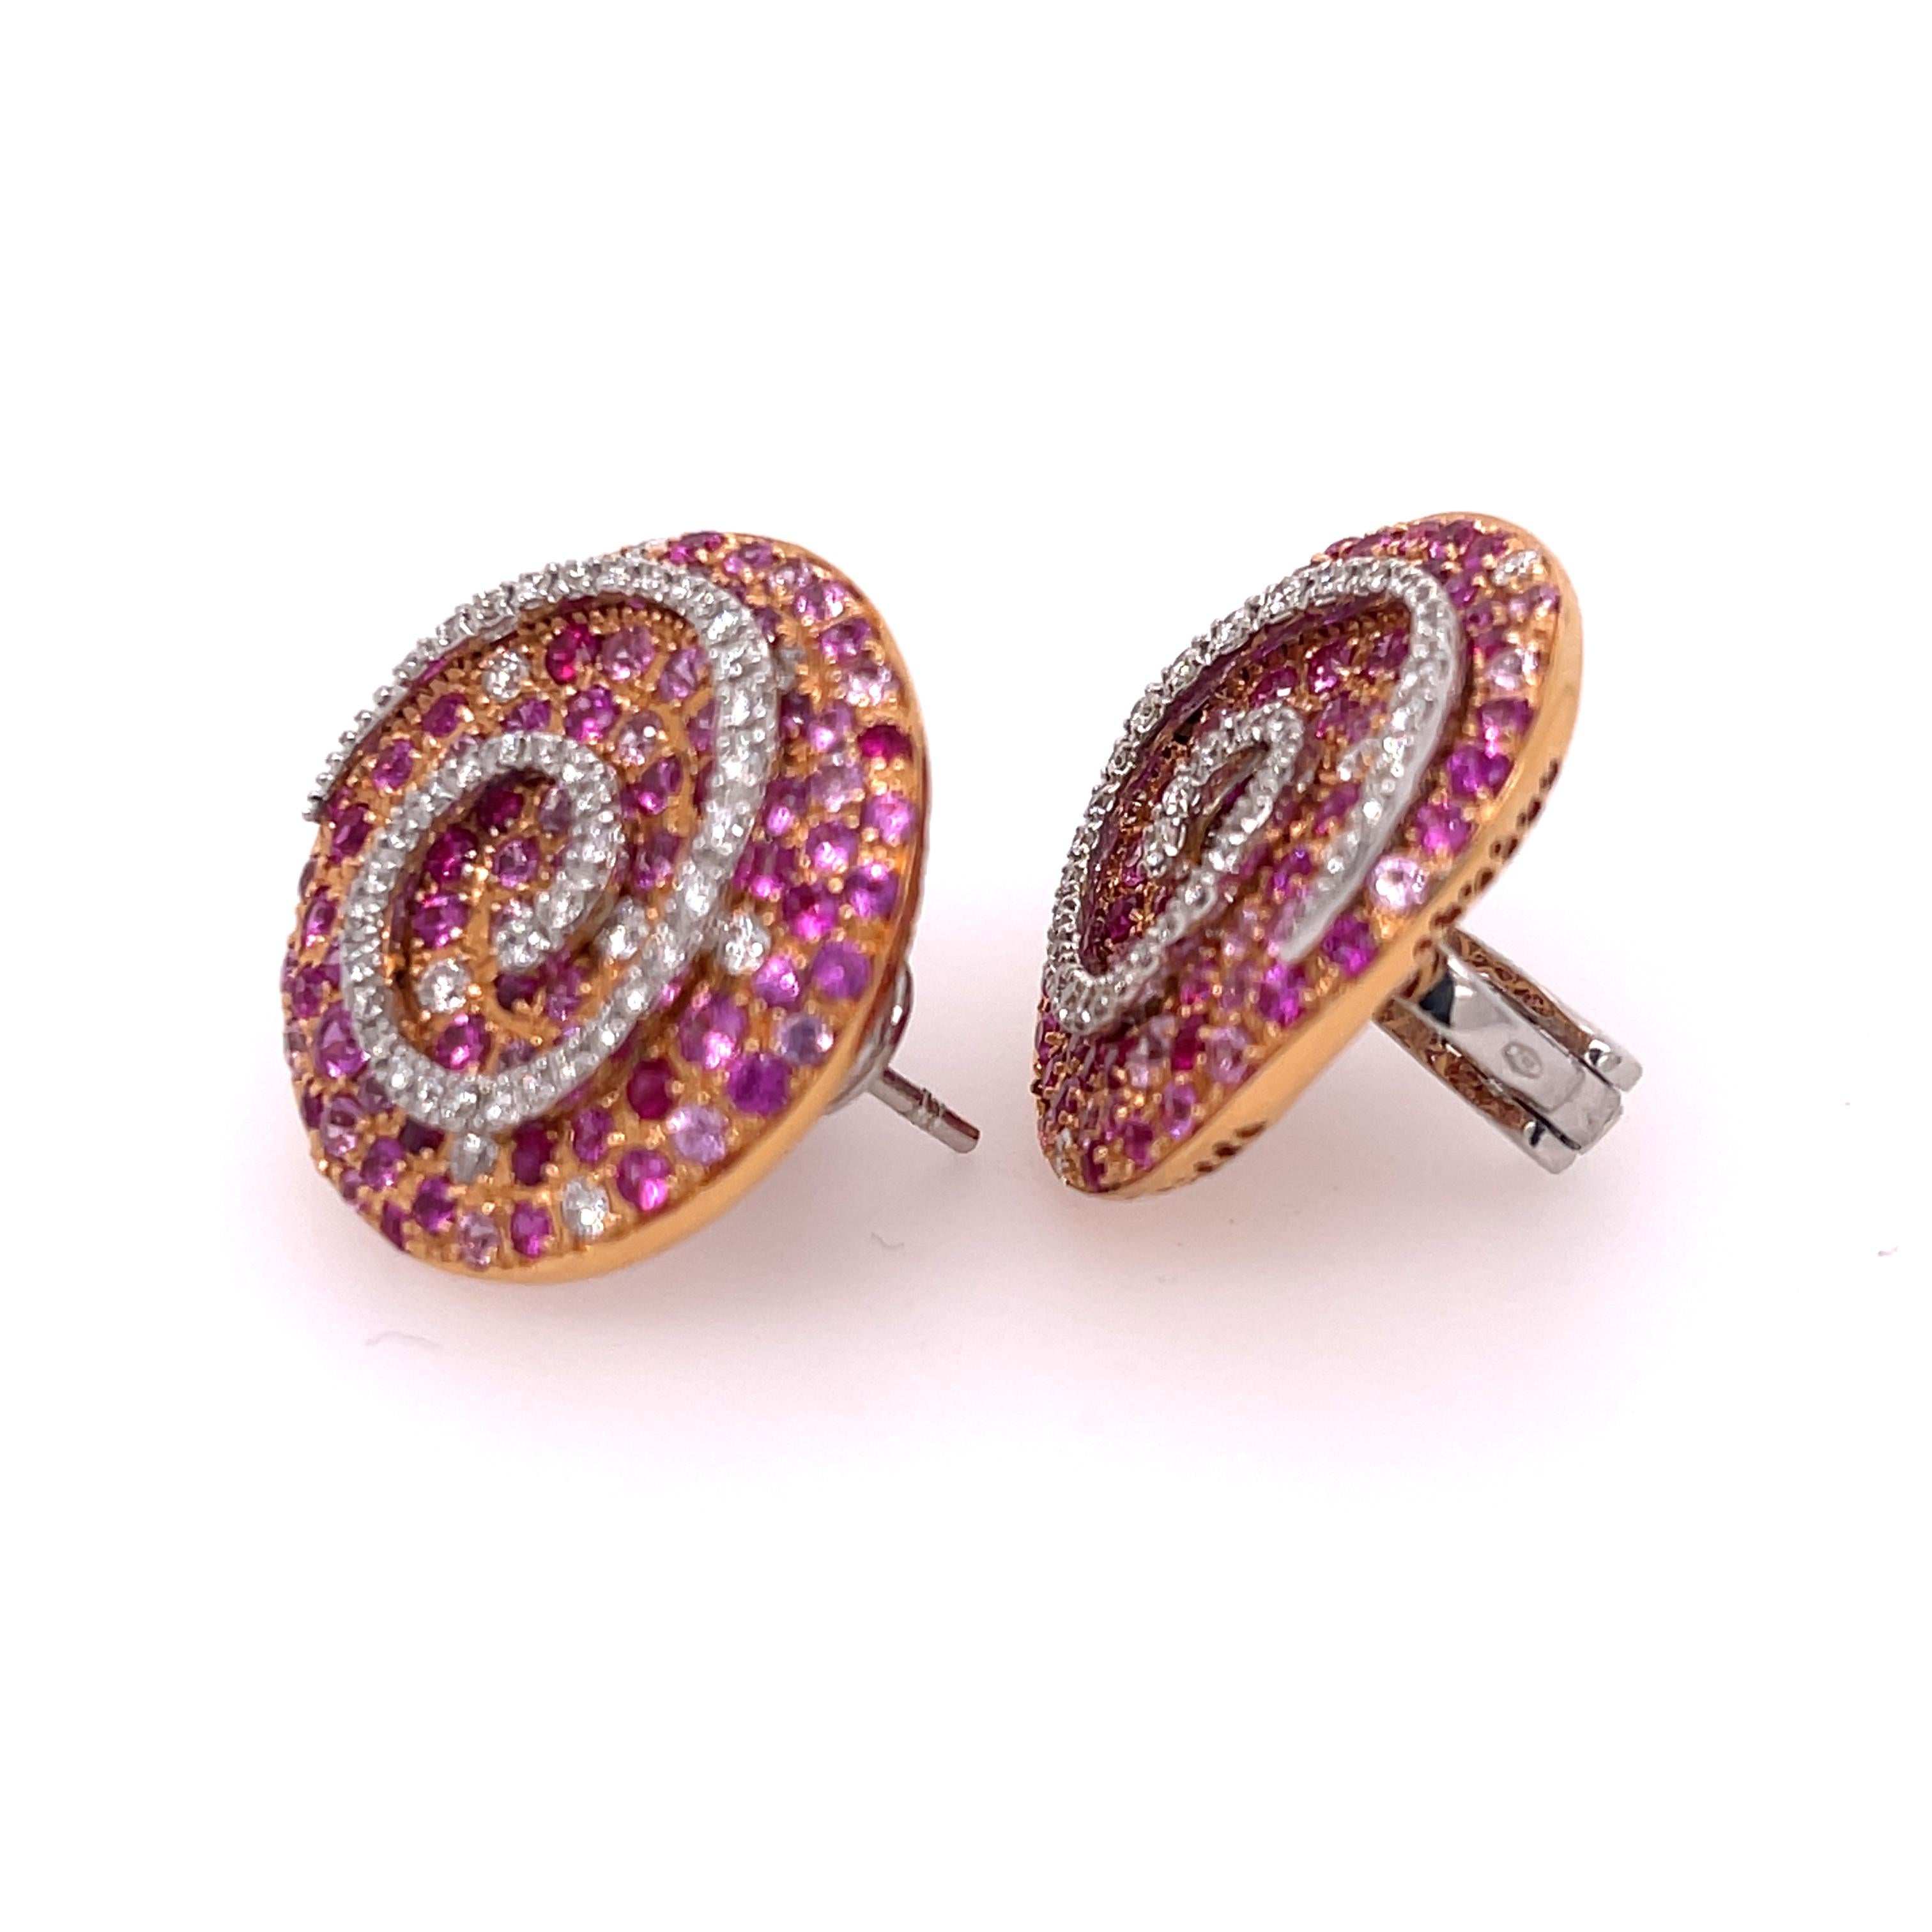 Ugo Cala ring with 3.79ctw of ruby and pink sapphires, 0.78ctw of diamonds, set in 18K rose and white gold. These captivating earrings each feature a disk of pave set rubies and pink sapphires with a swirl of diamonds running through it. This